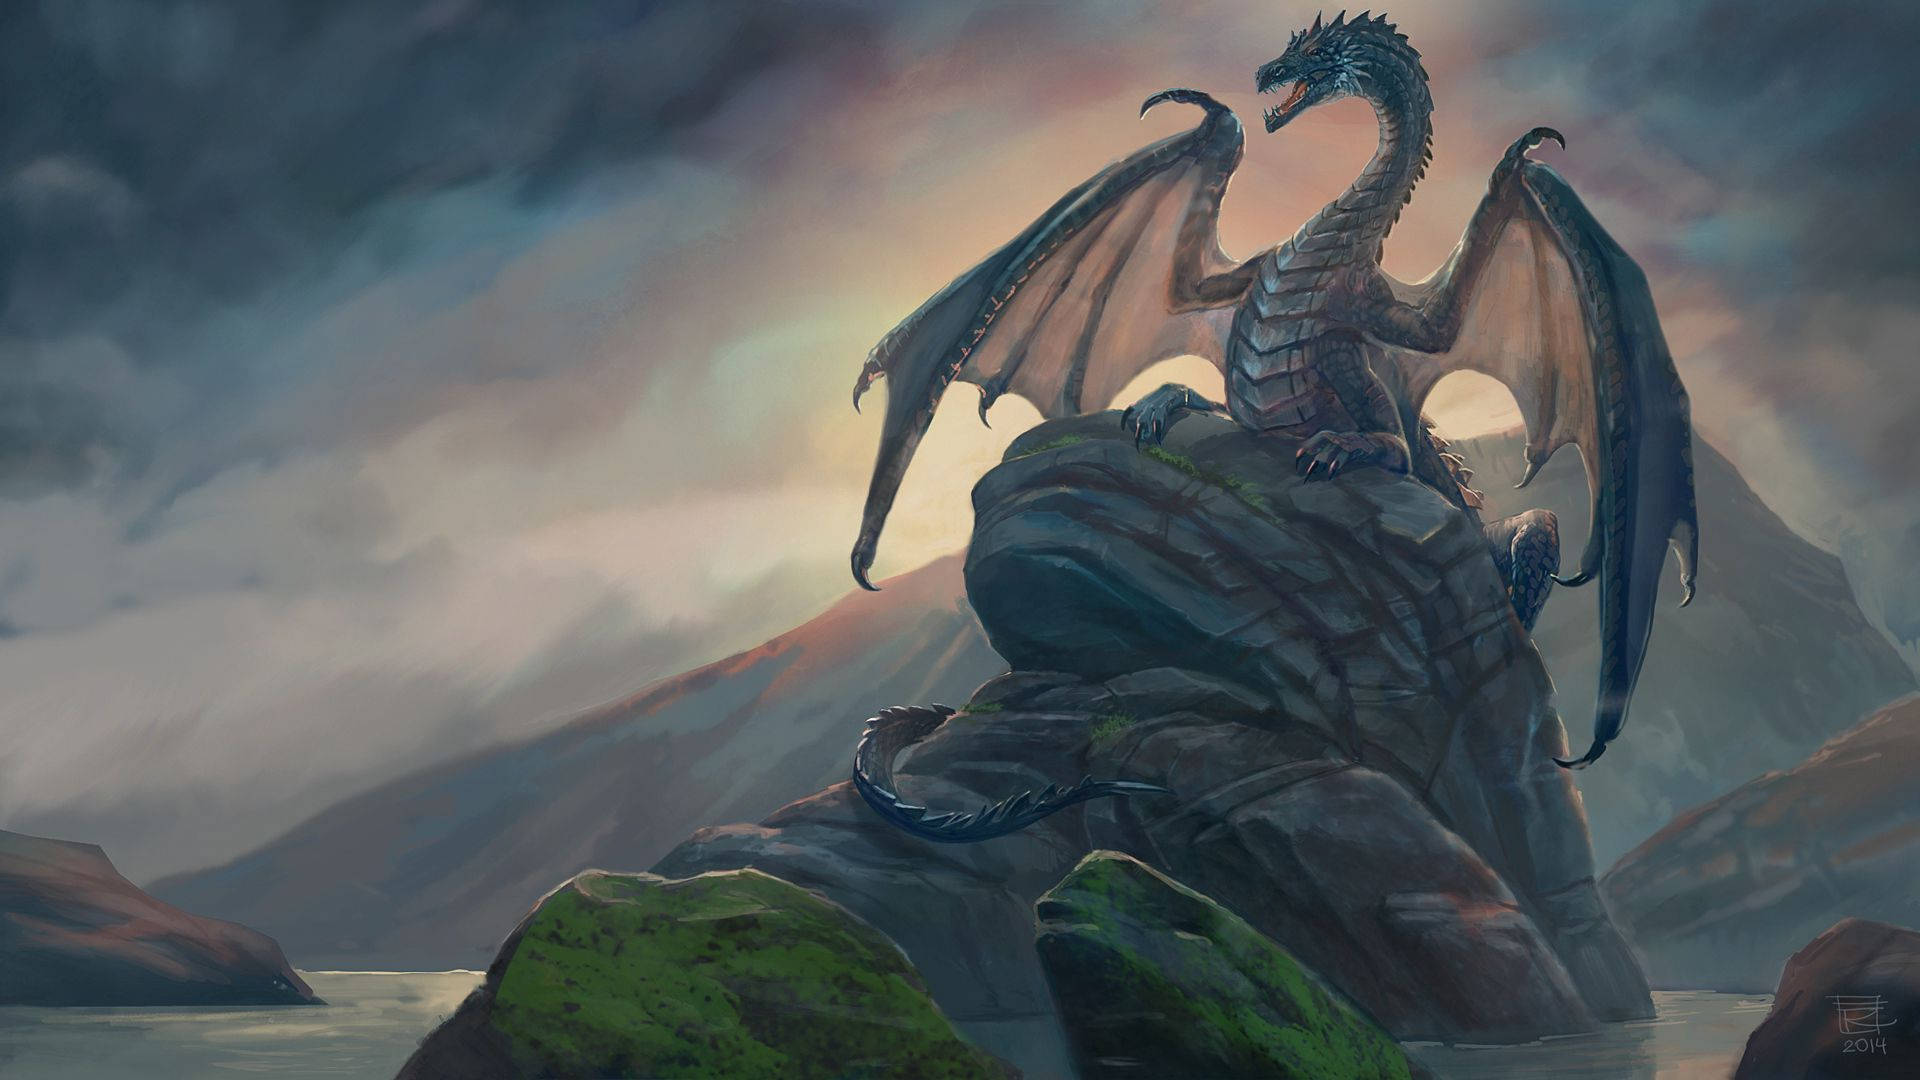 1920X1080 Dragon Wallpaper and Background